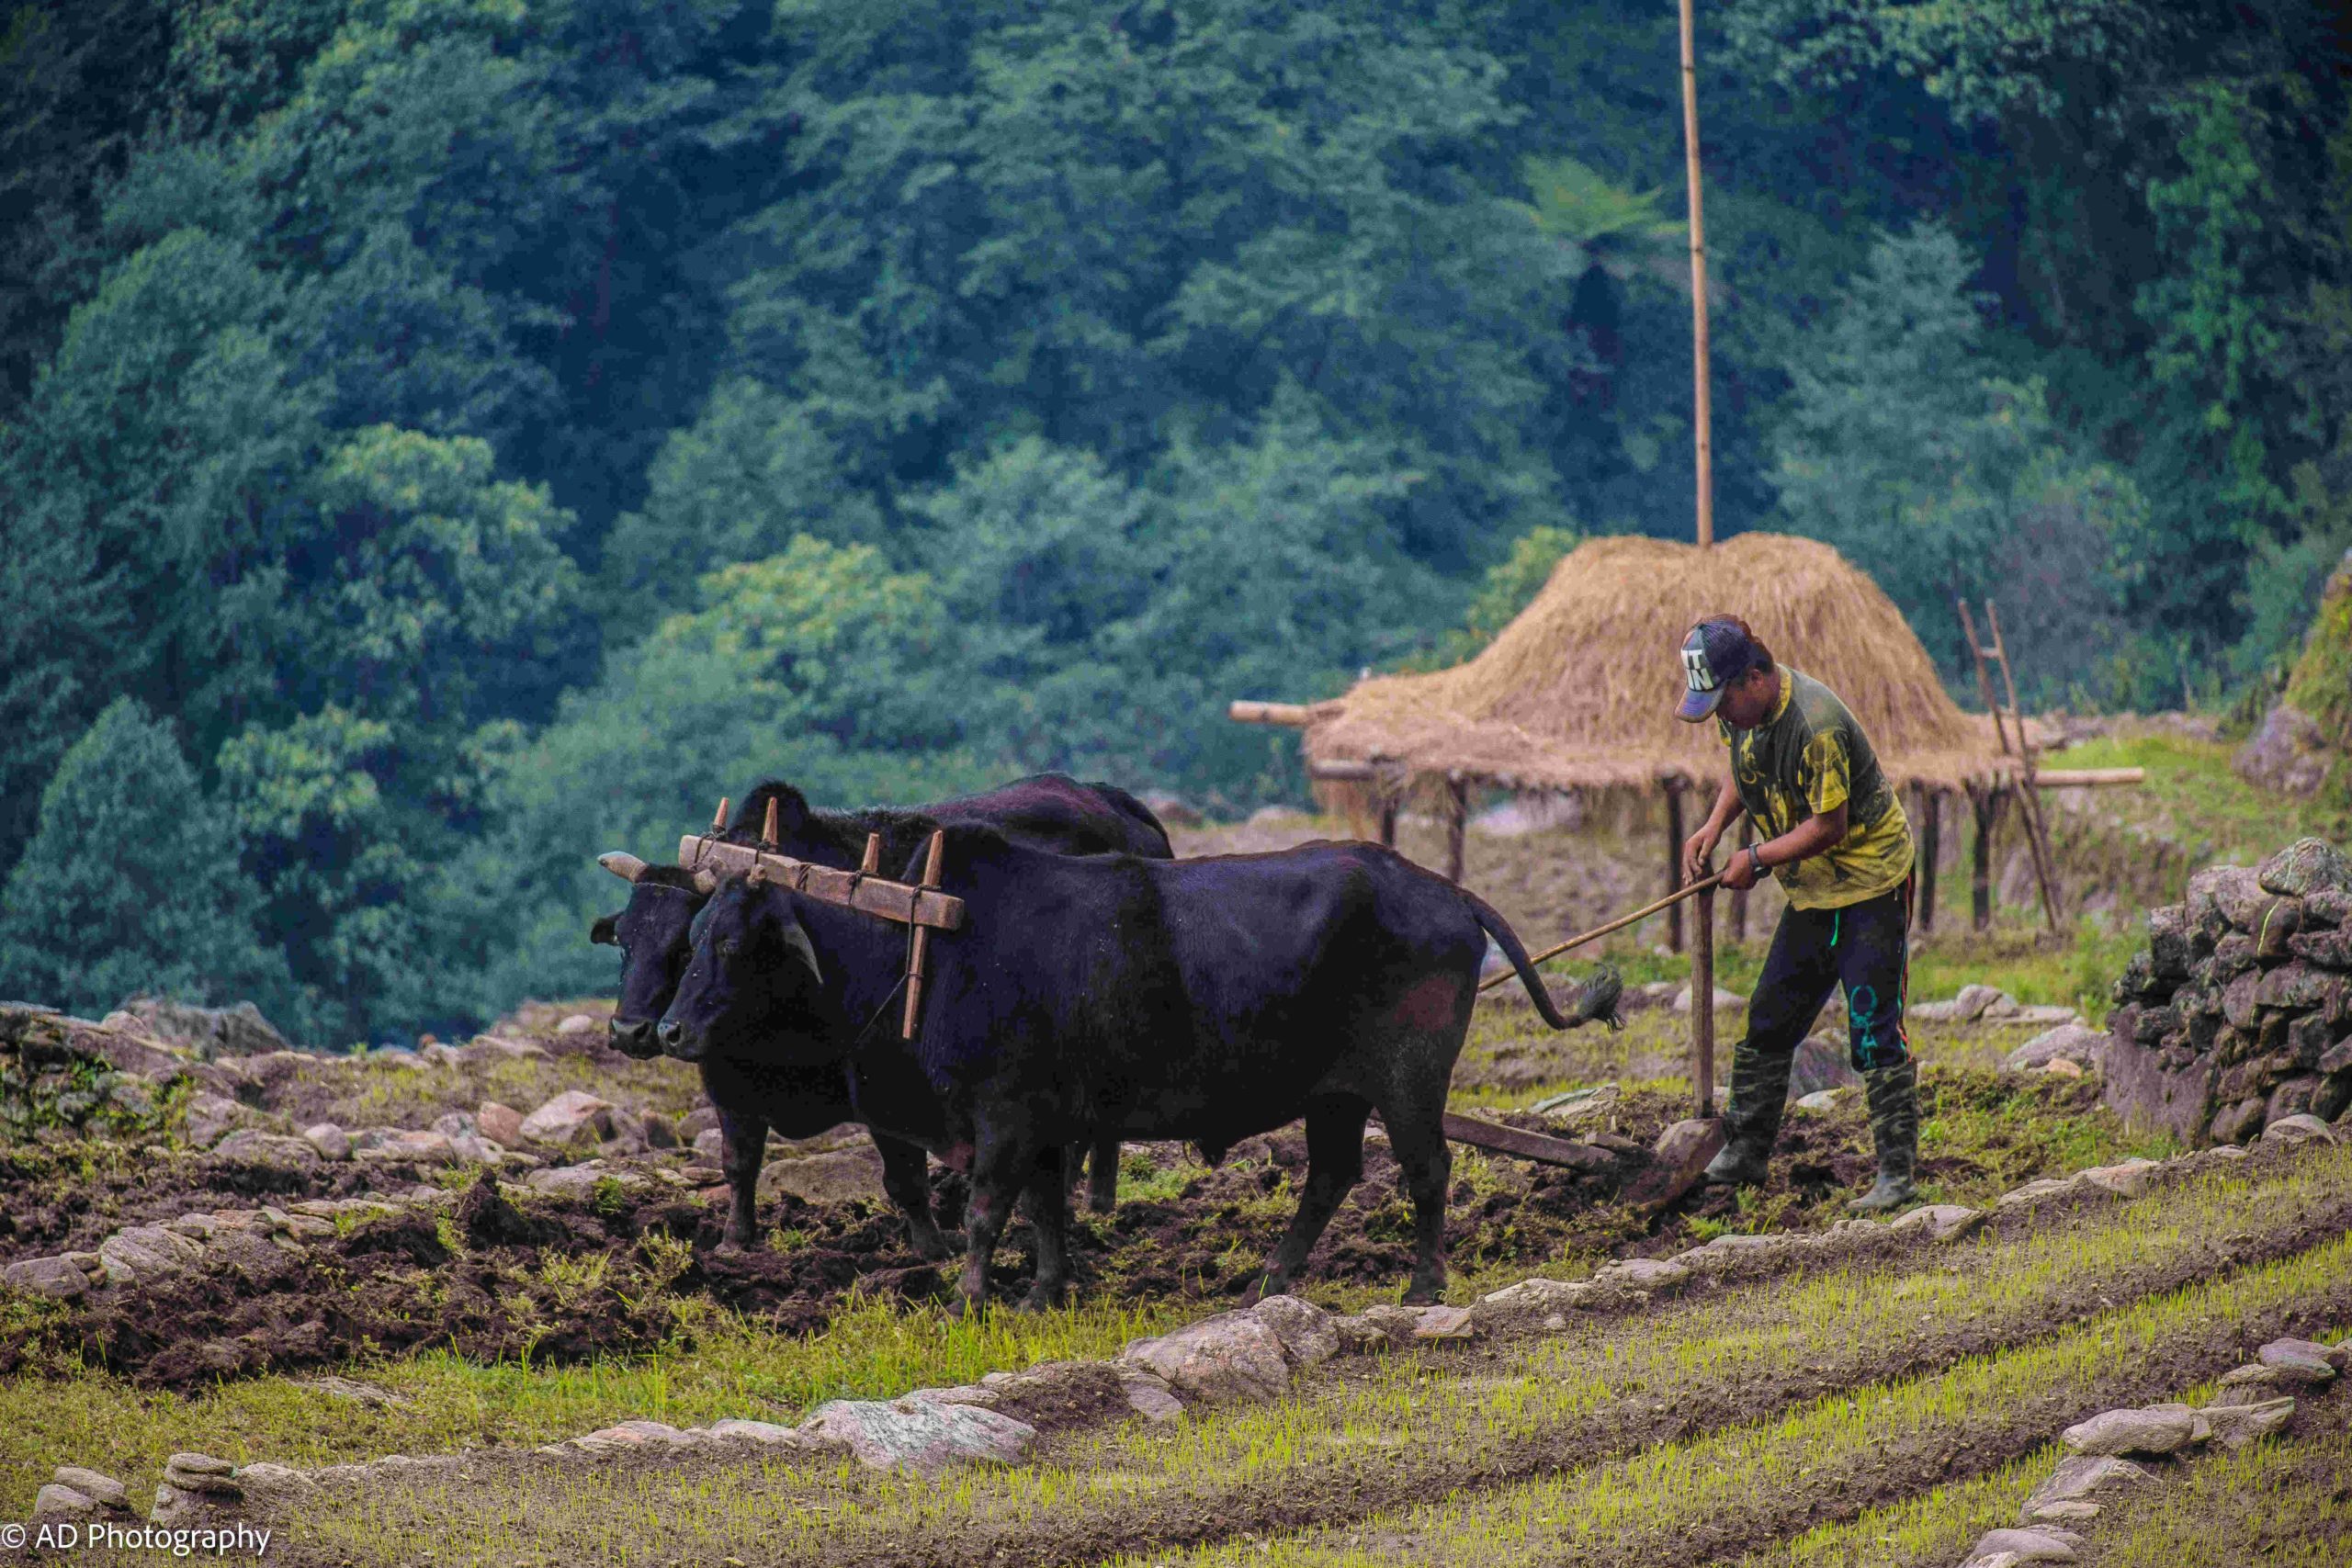 A young farmer ploughing the field for agriculture in West-Nepal.